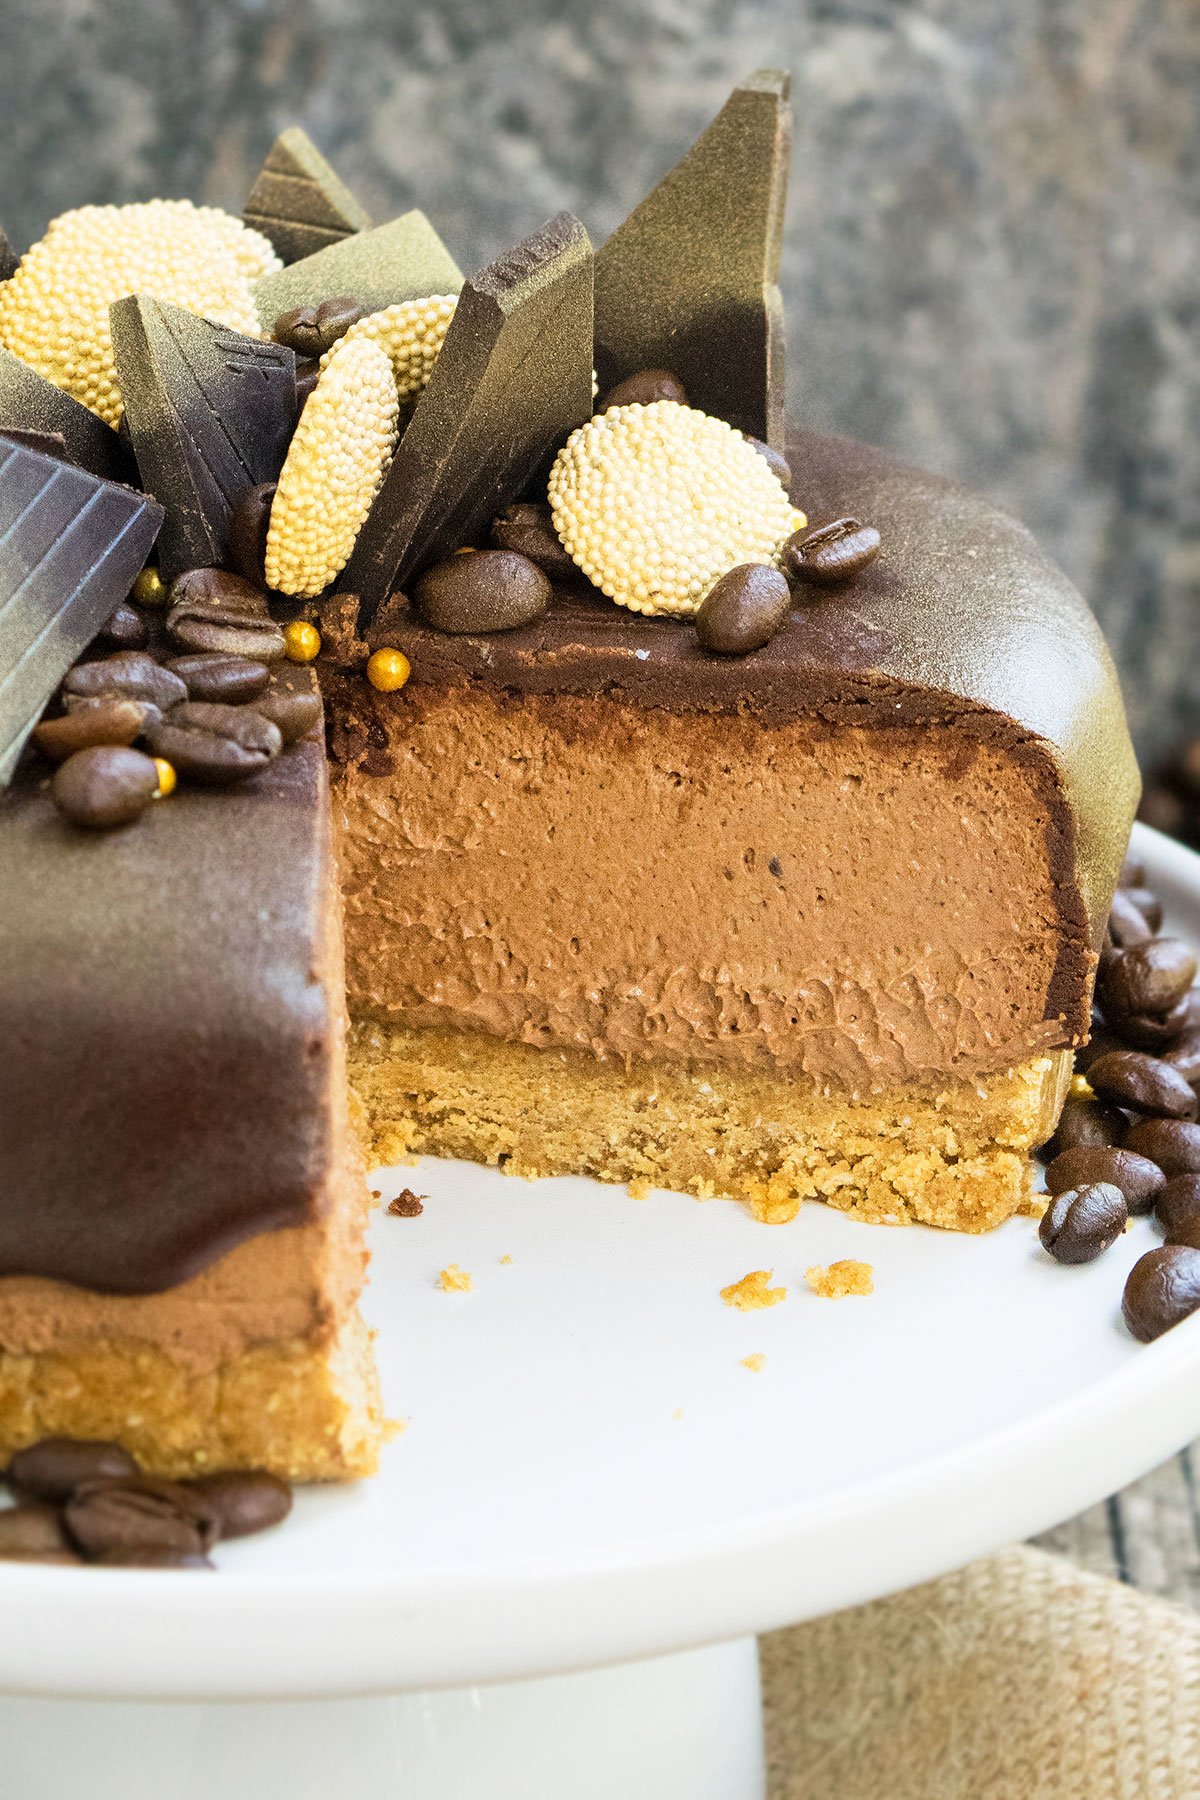 Easy No Bake Mocha Cheesecake With One Slice Removed on White Cake Stand. 